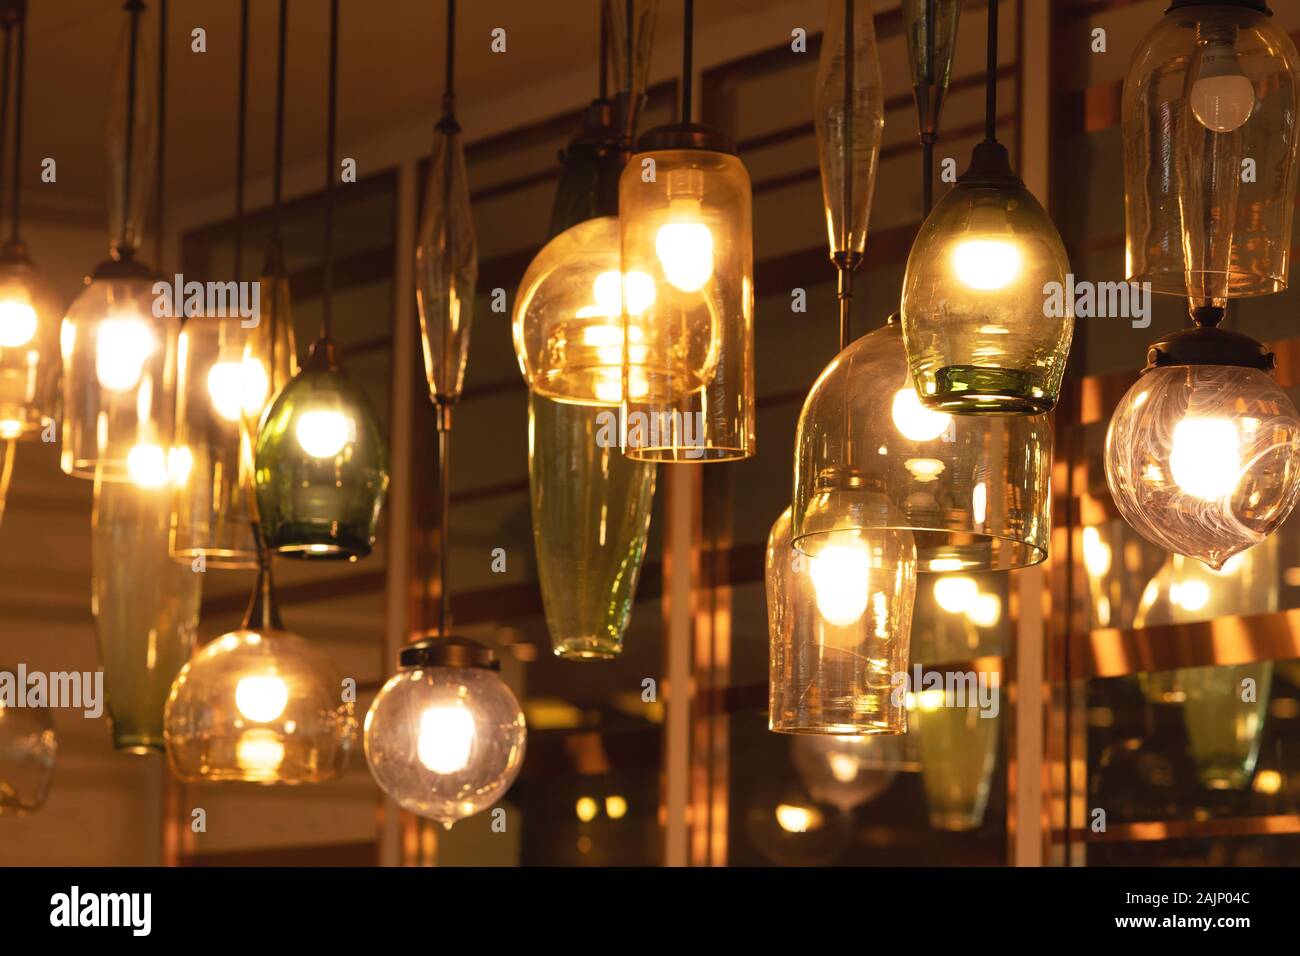 Different kind and size of bulbs for illumination in a luxury place. Stock Photo